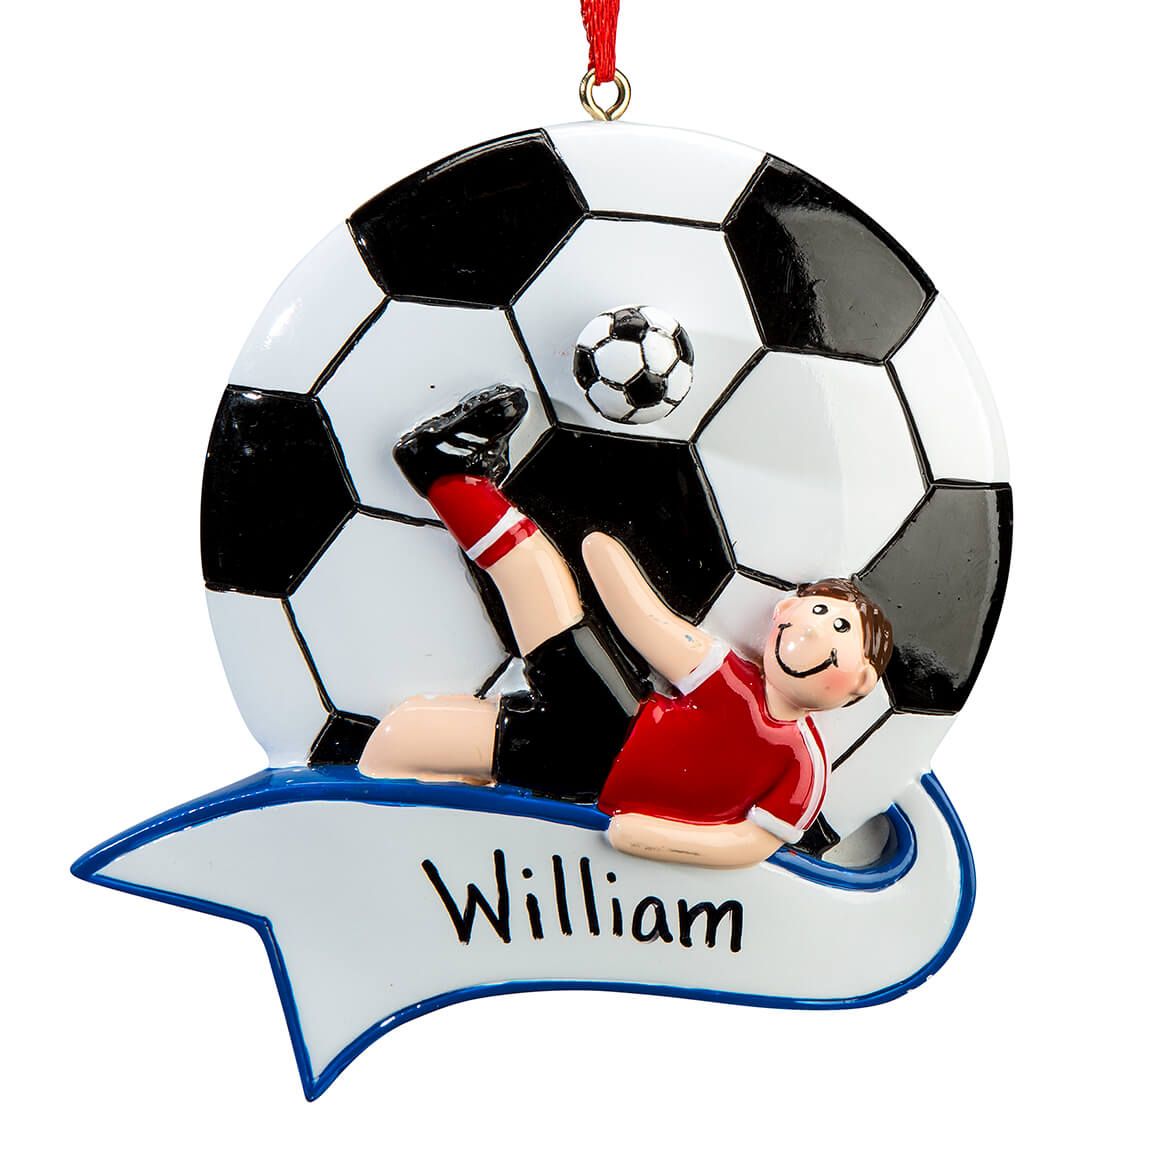 Personalized Soccer Ornament + '-' + 364917